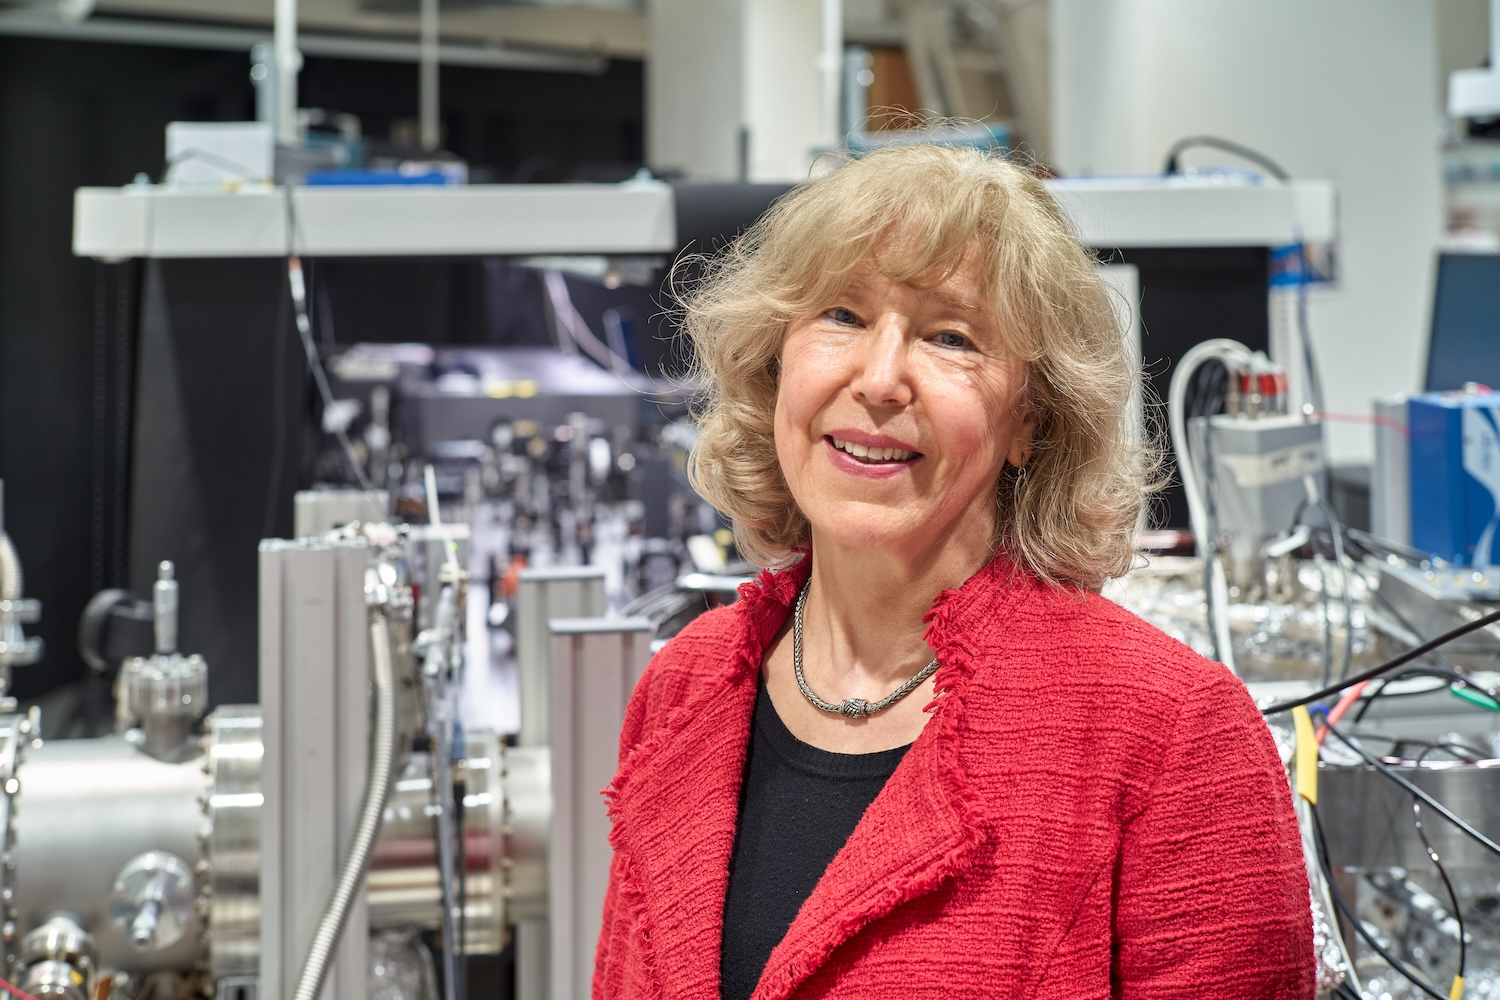 Norah Berrah, professor of physics, standing in front of science equipment in her lab.